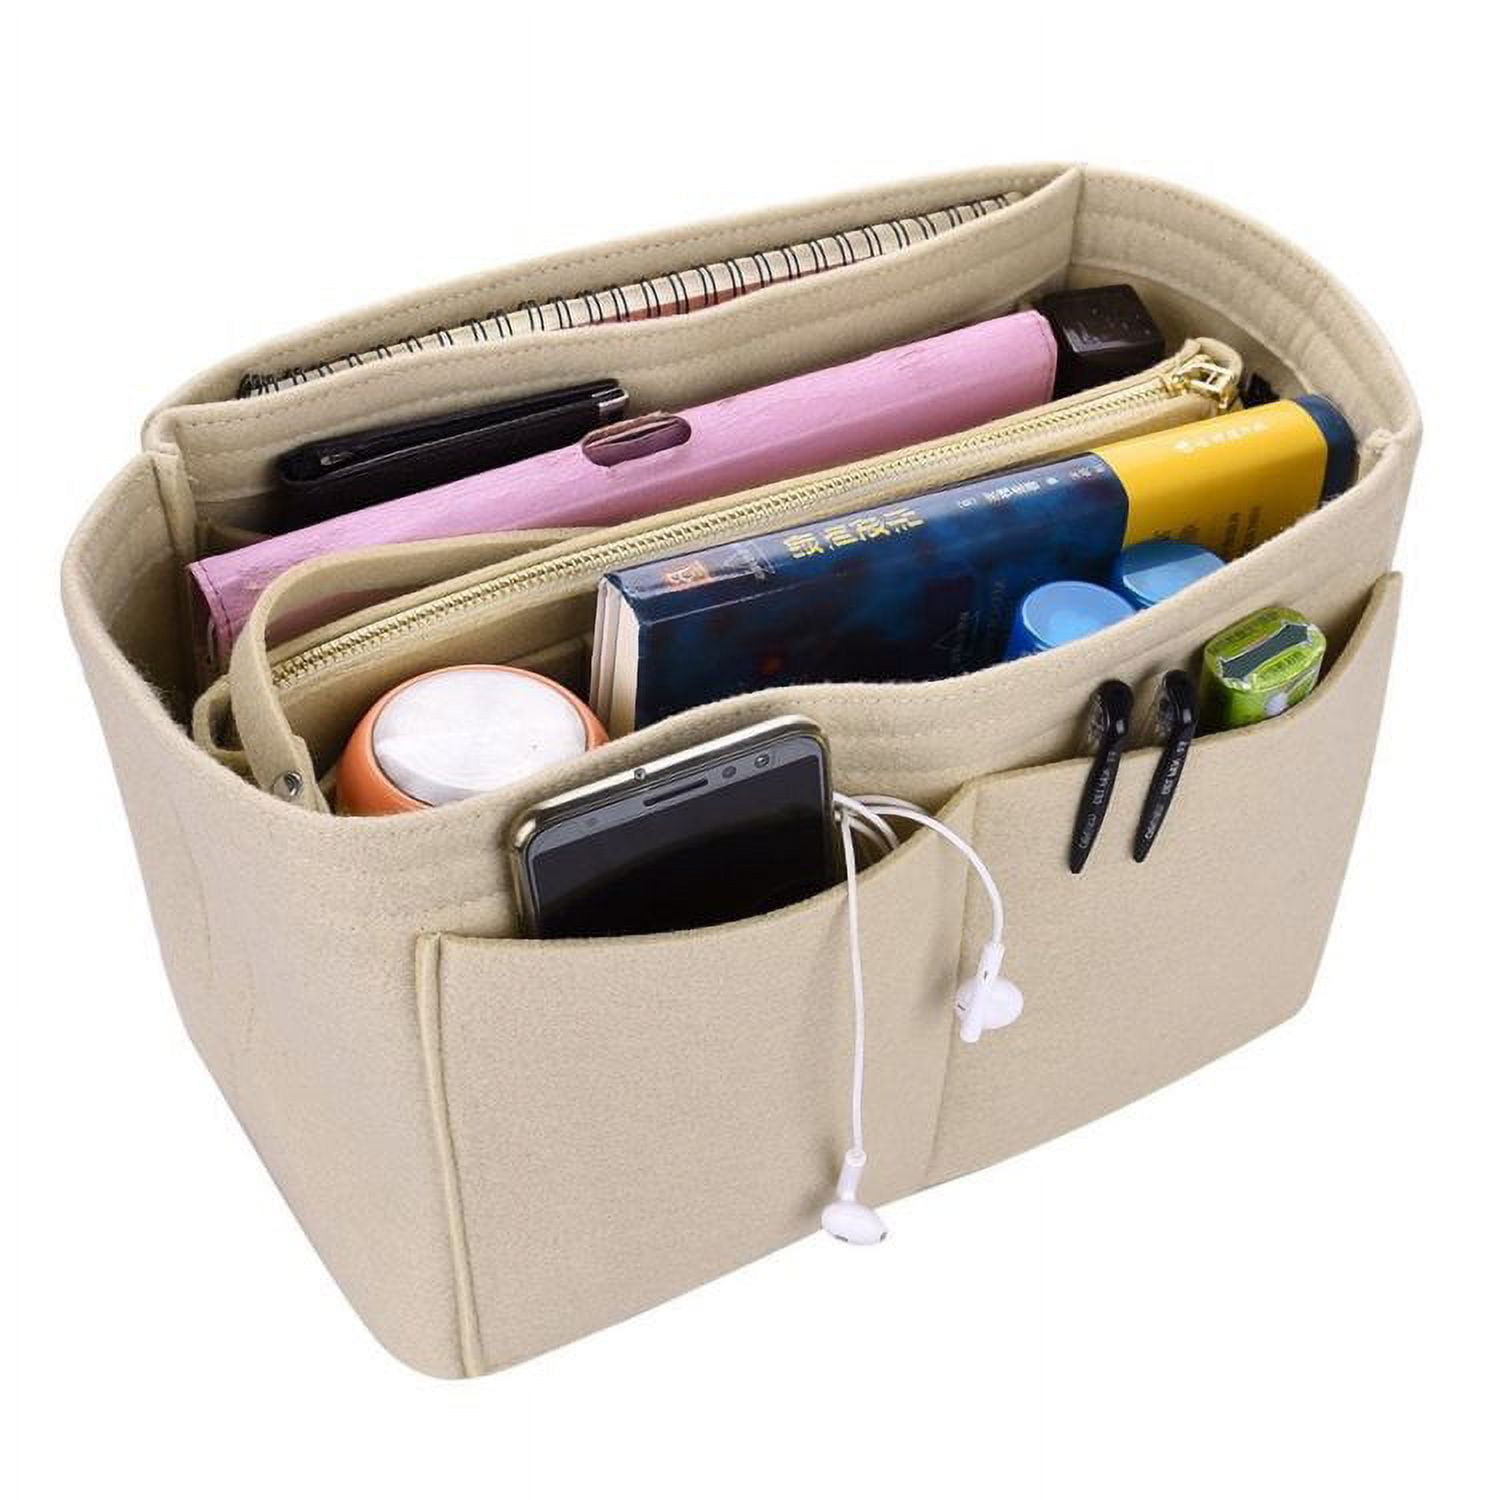 Gustave Felt Purse Organizer Insert Handbag & Tote Organizer, Bag in Bag,  Perfect for Speedy Neverfull and More (8.7